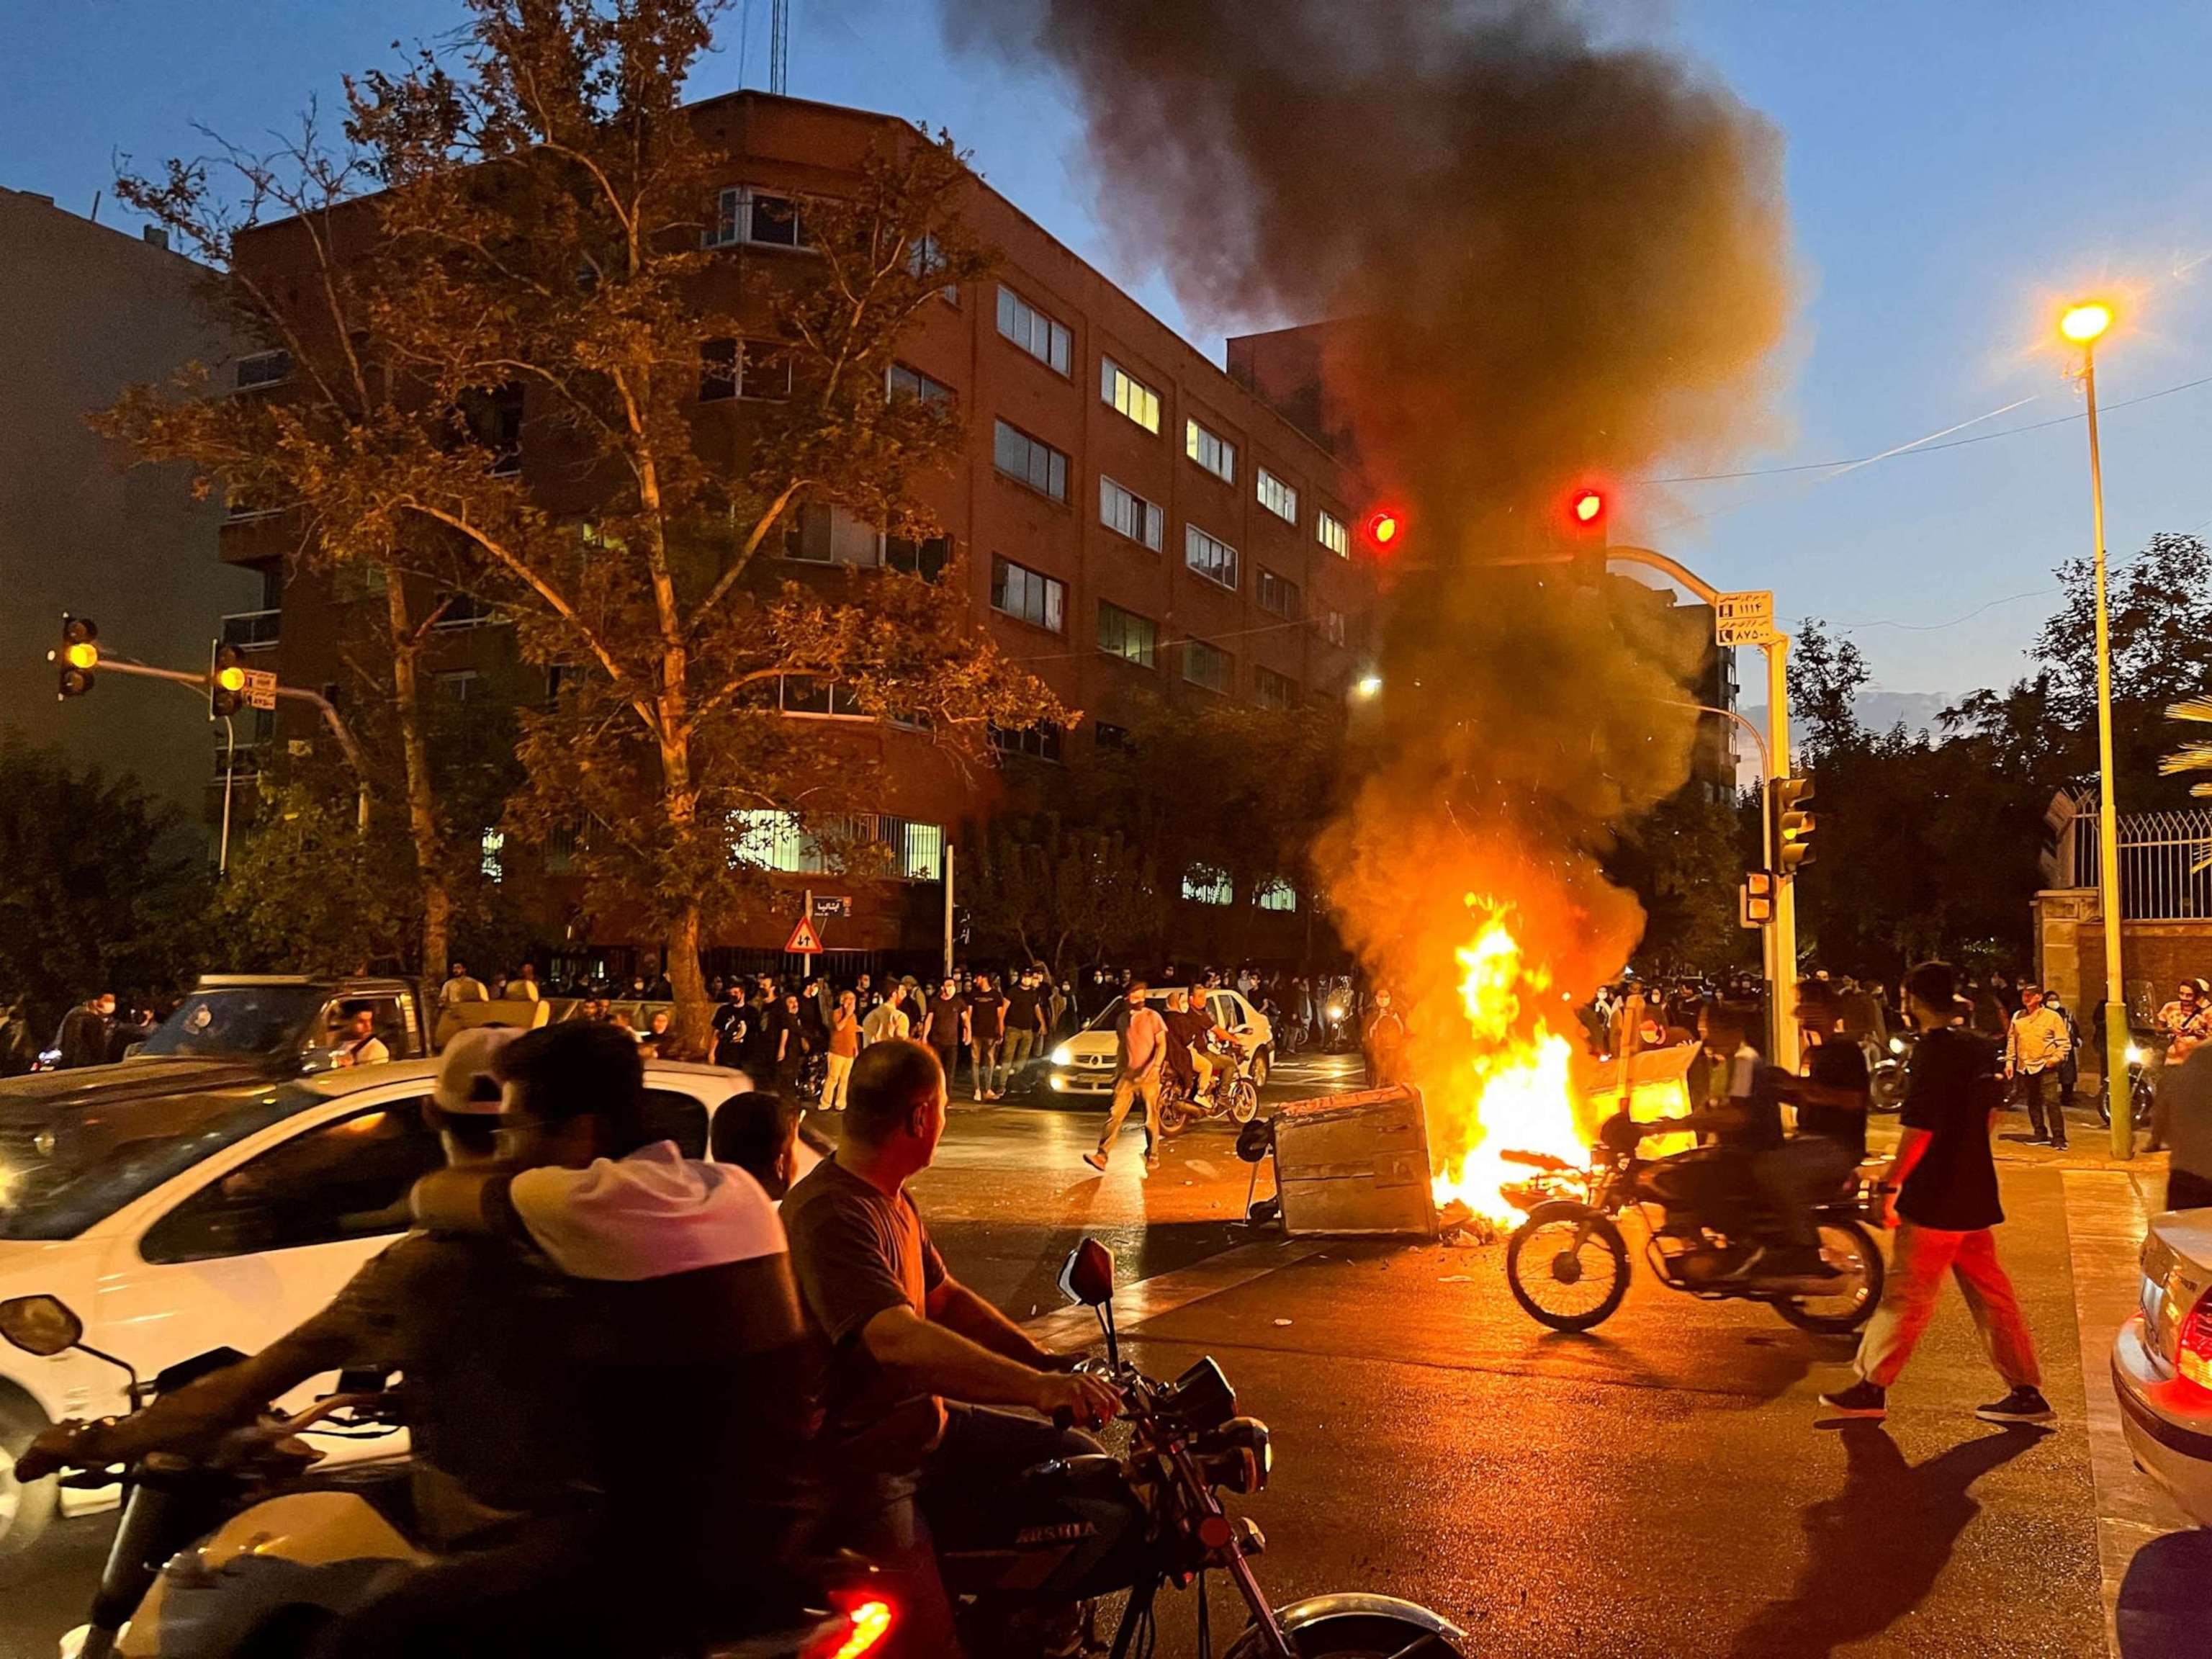 PHOTO: FILE - A police motorcycle burns during a protest over the death of Mahsa Amini, a woman who died after being arrested by the Islamic republic's "morality police", in Tehran, Iran Sept. 19, 2022.